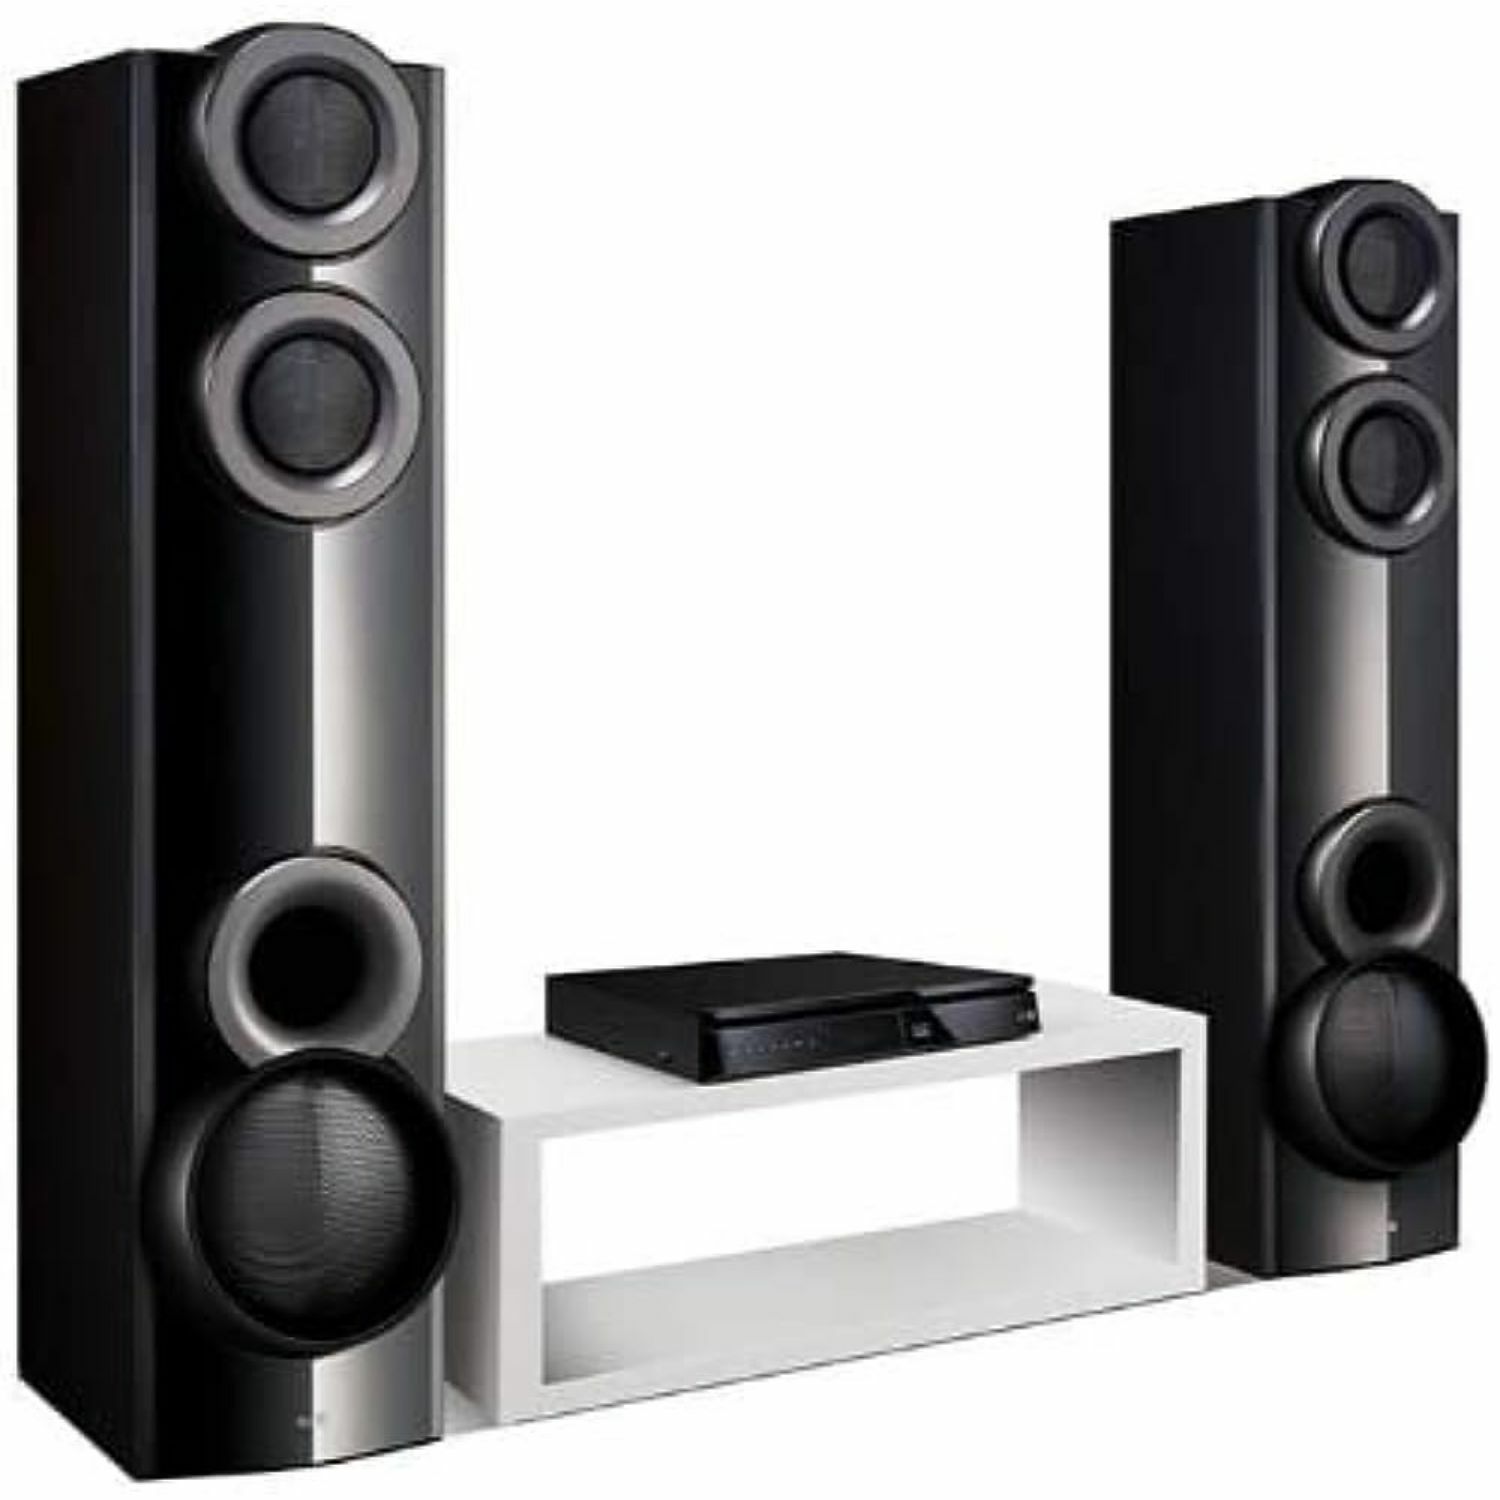 LG 3D-Capable 1000W 4.2ch Blu-ray Disc Home Theater System - Black - image 2 of 5